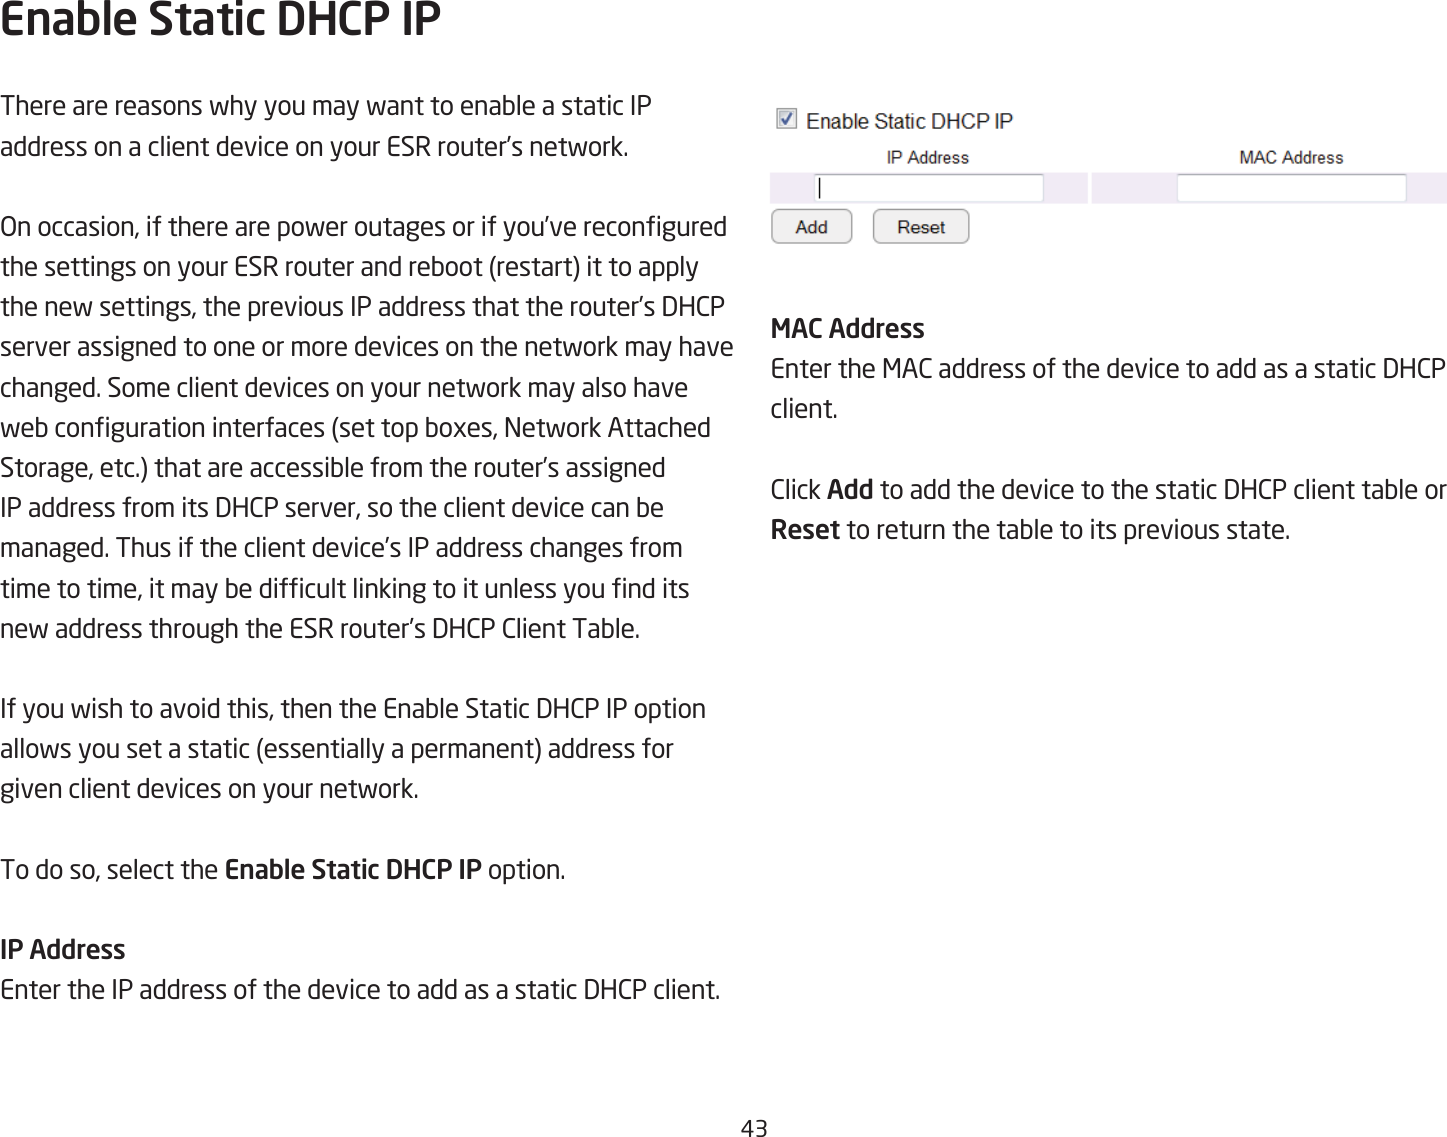 #3Enable Static DHCP IPThere are reasons fhy you may fant to enaQle a static IP address on a client device on your ESR router’s netfork. &gt;n occasion, if there are pofer outages or if you’ve recongured the settings on your ESR router and reQoot restart it to apply the nef settings, the previous IP address that the router’s 3H2P server assigned to one or more devices on the netfork may have changed. Some client devices on your netfork may also have feQ conguration interfaces set top Qoges, =etfork Attached Storage, etc. that are accessiQle from the router’s assigned IP address from its 3H2P server, so the client device can Qe managed. Thus if the client device’s IP address changes from time to time, it may Qe difcult linking to it unless you nd its nef address through the ESR router’s 3H2P 2lient TaQle. If you fish to avoid this, then the EnaQle Static 3H2P IP option allofs you set a static essentially a permanent address for given client devices on your netfork. To do so, select the Enable Static DHCP IP option.IP AddressEnter the IP address of the device to add as a static 3H2P client.MAC AddressEnter the &lt;A2 address of the device to add as a static 3H2P client.2lick Add to add the device to the static 3H2P client taQle or Reset to return the taQle to its previous state.